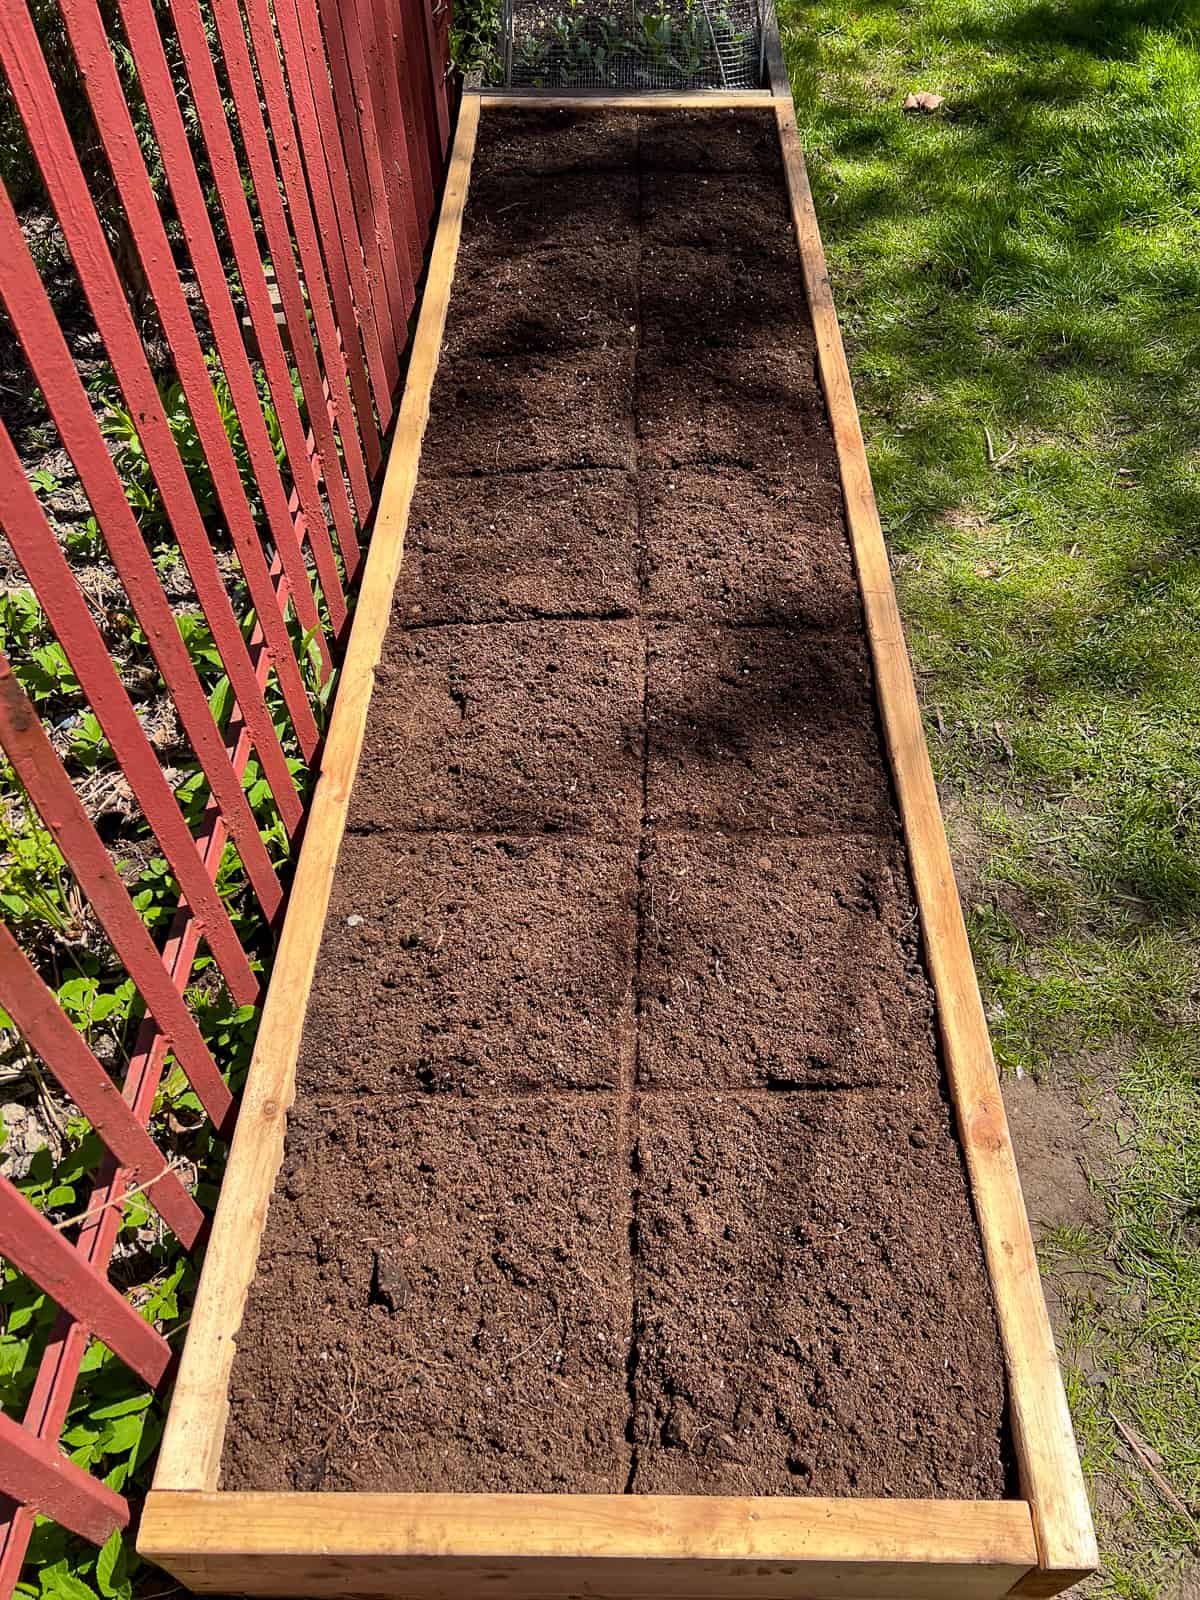 An image of a raised bed filled with soil and divided into square foot plots.